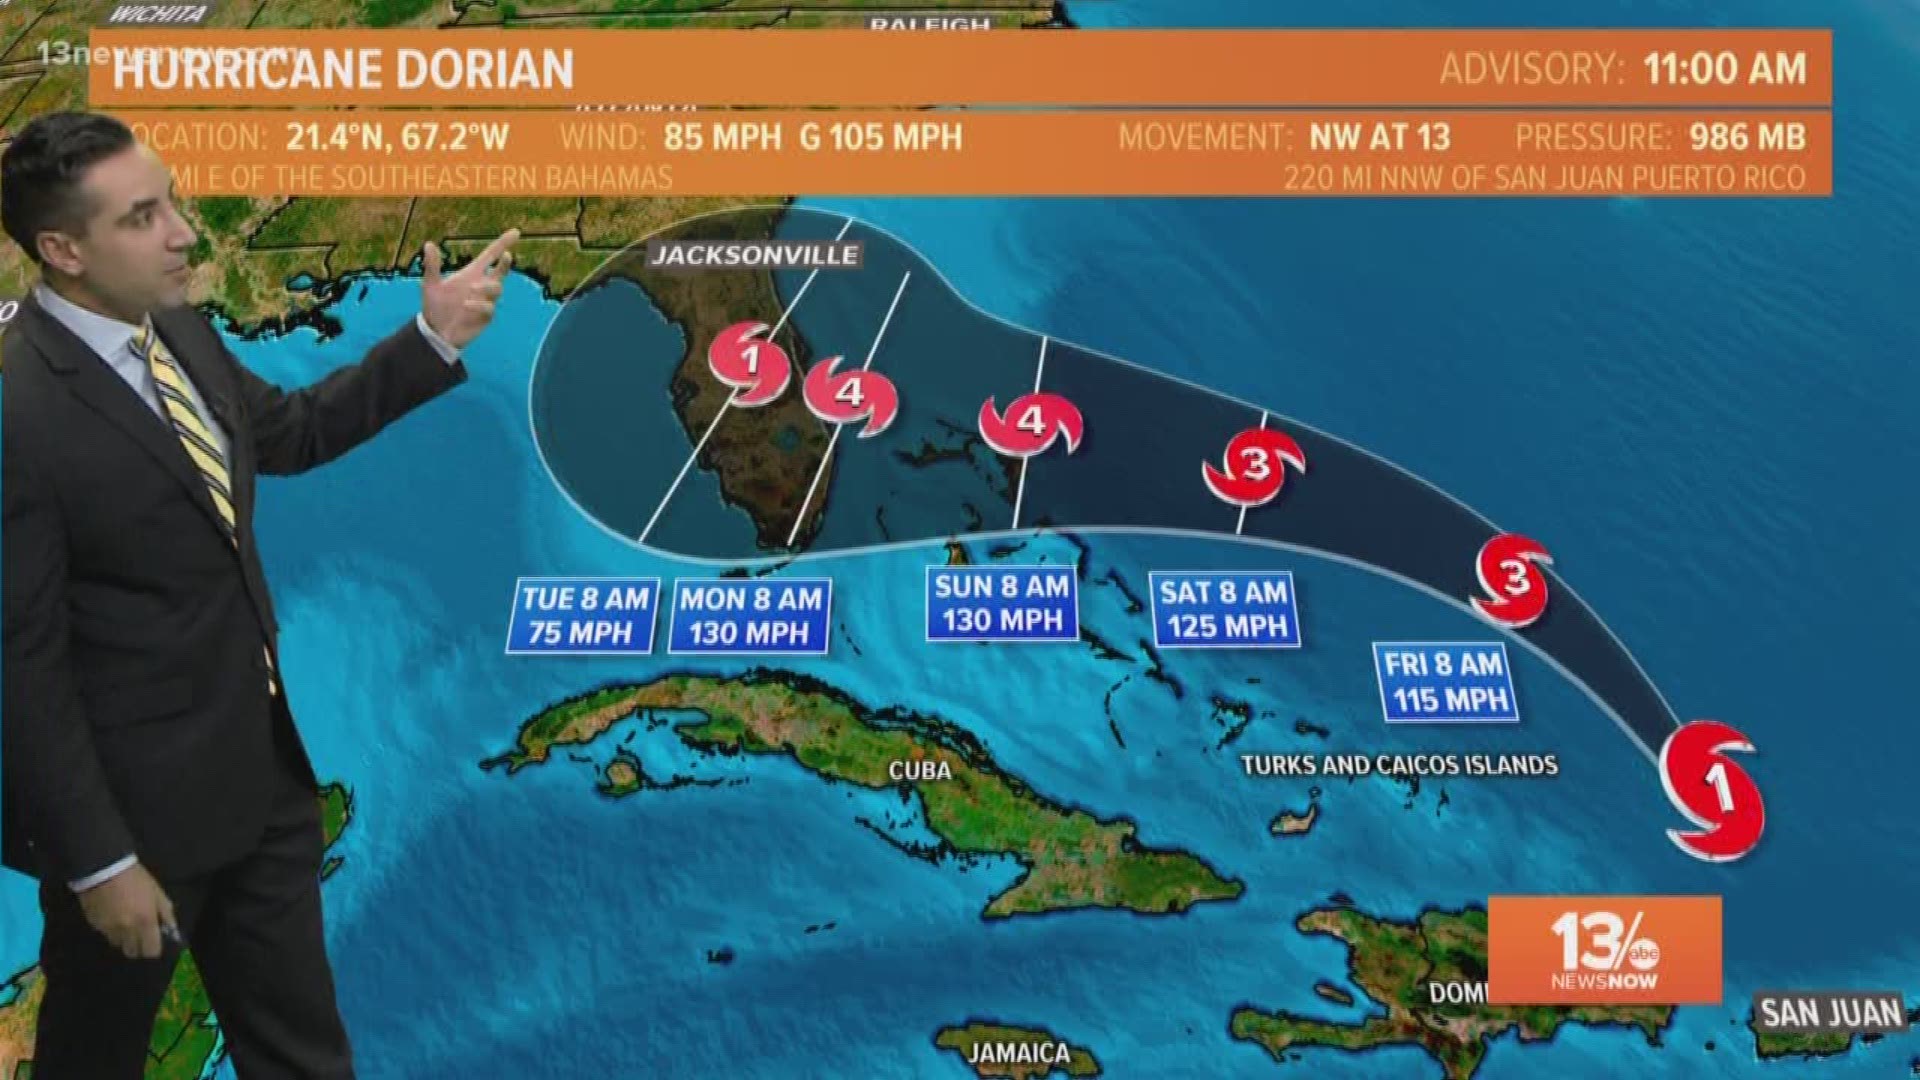 The latest forecast from the National Hurricane Center has Hurricane Dorian strengthening to a Category 4 storm with max winds of 130 mph before landfall. The entire east coast of Florida and some Bahamian islands should be preparing now. As the forecast cone goes into early next week, the uncertainty increases so anyone in the cone should be on alert.